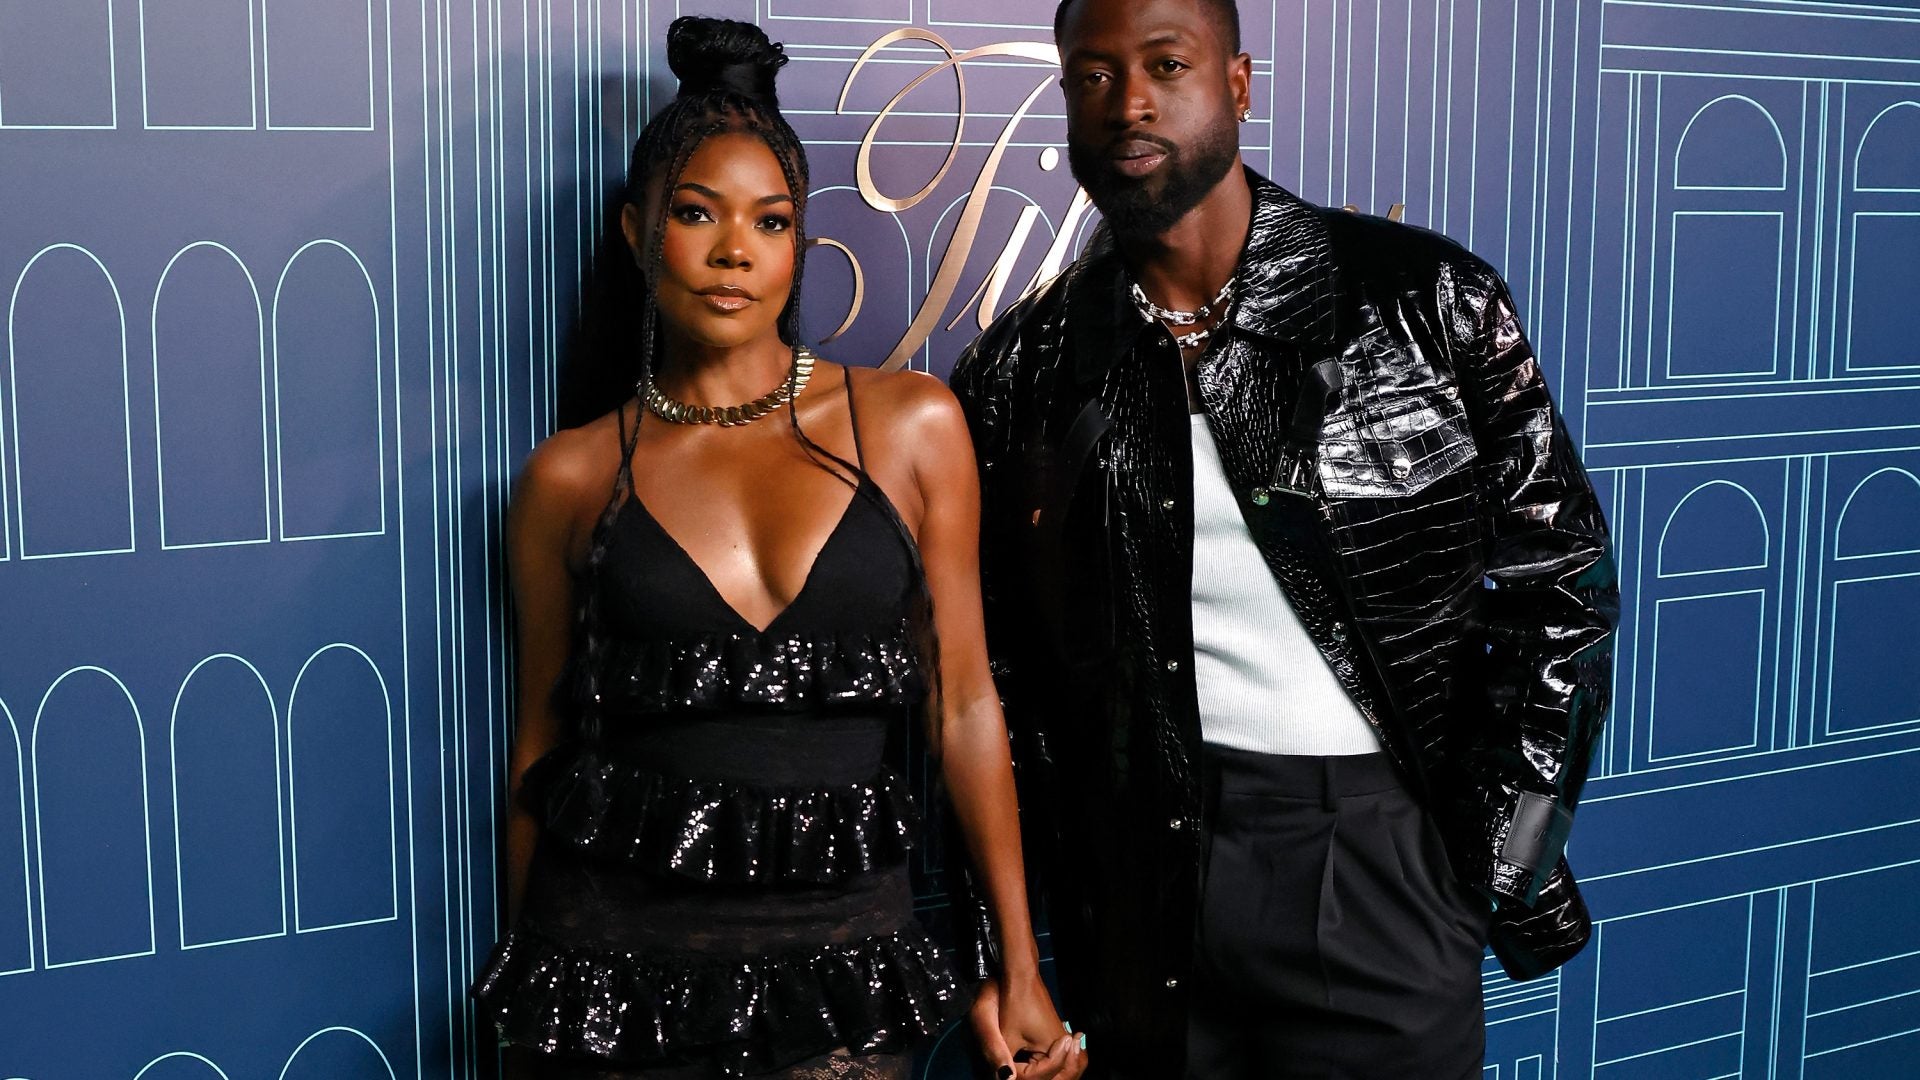 Some People Think Gabrielle Union Is Exhibiting Toxic Independence. What Does That Mean?